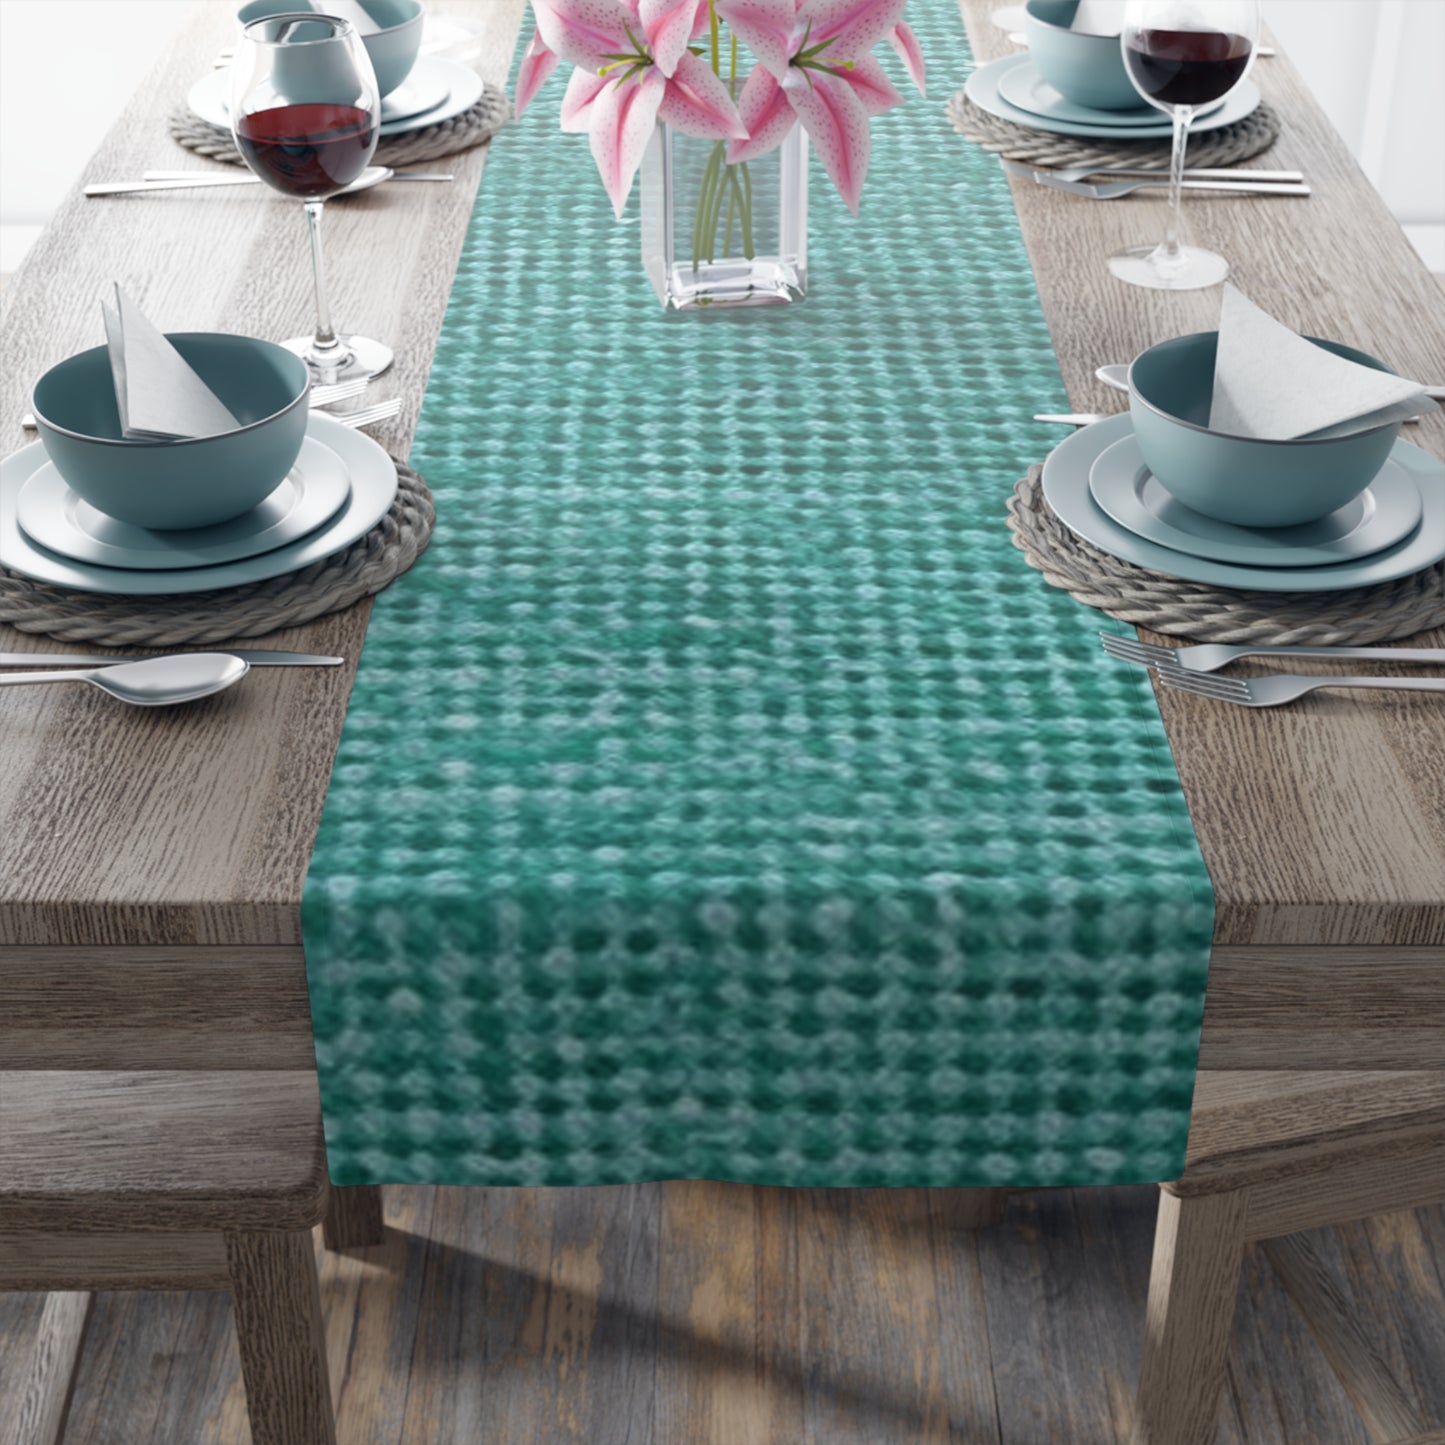 Quality Mint Turquoise Denim Fabric Deisgn, Stylish Material - Table Runner (Cotton, Poly)